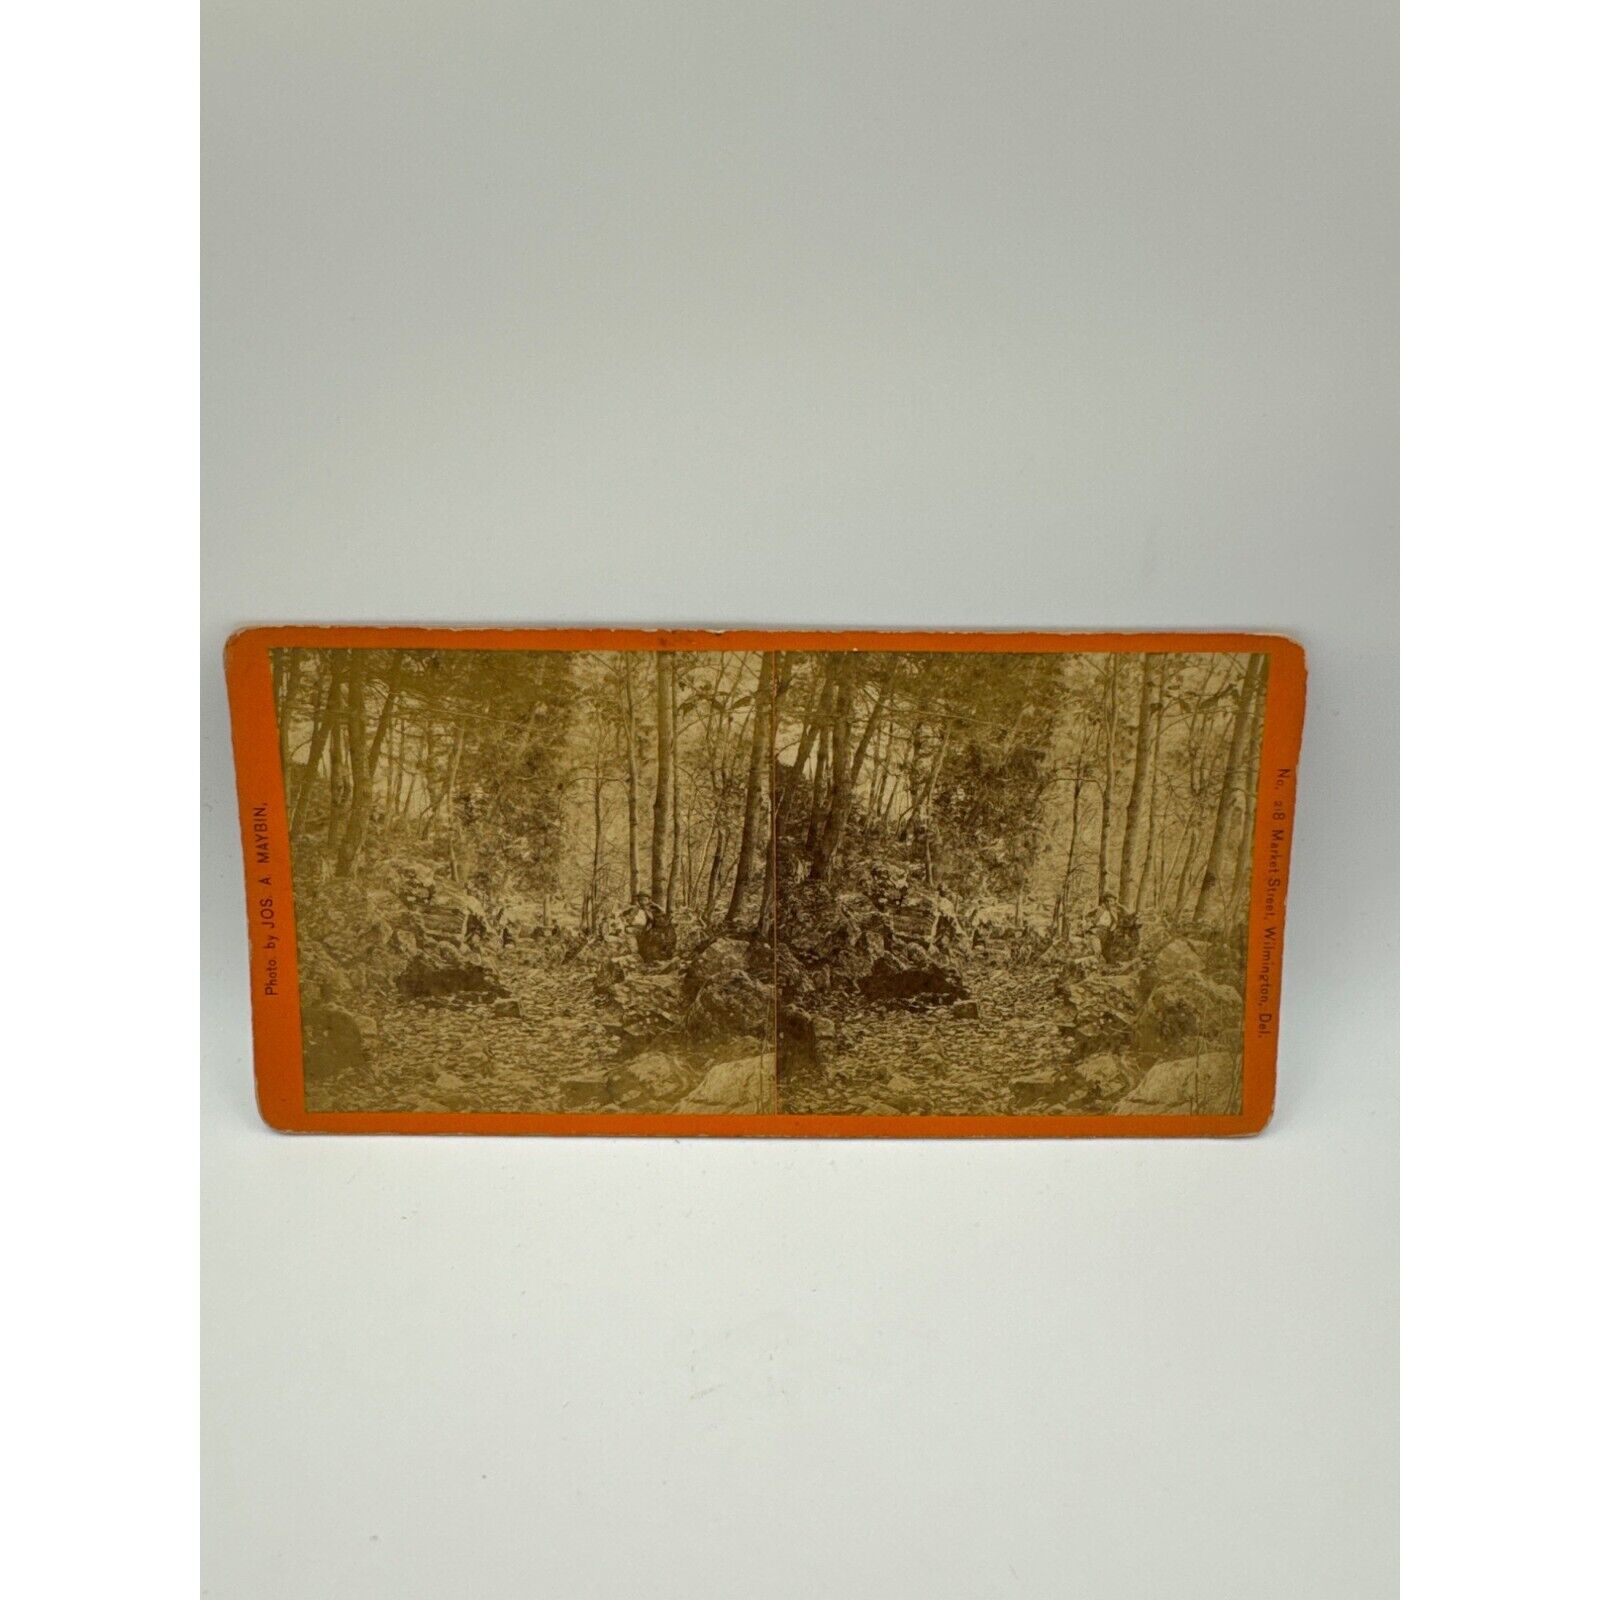 Antique Stereoscope Card  218 Market St Wilmington Del. Boy in Woods